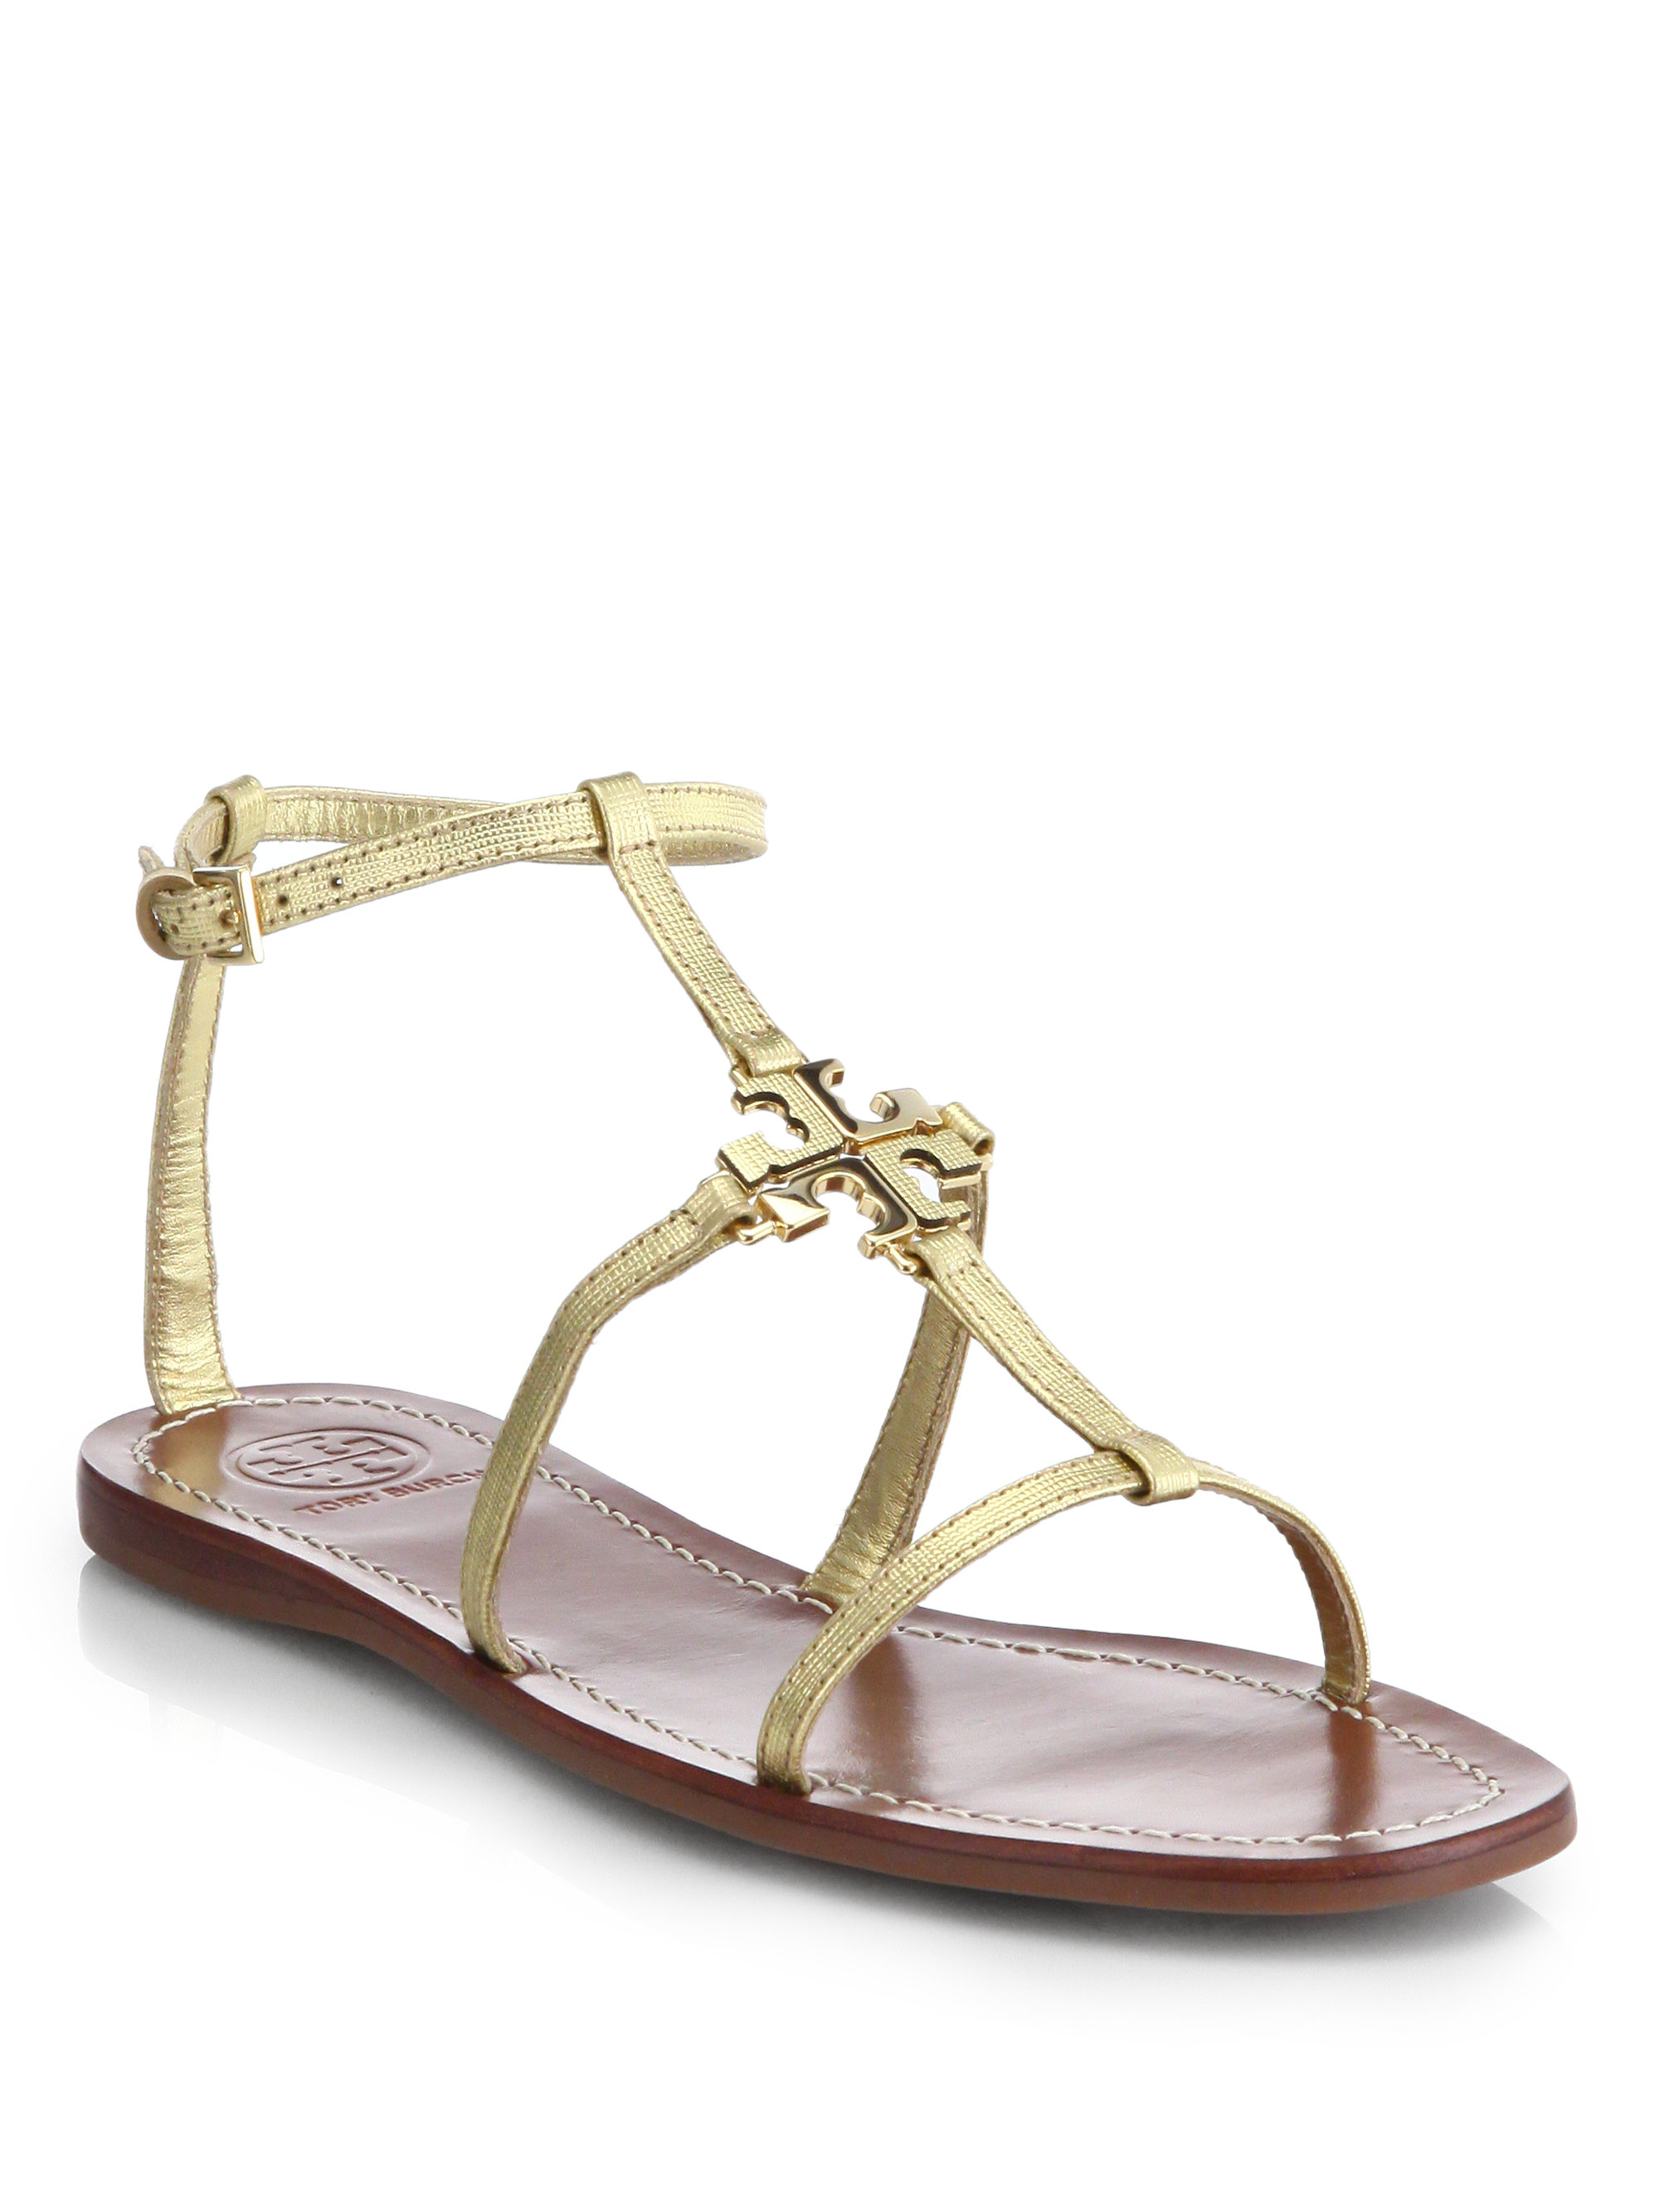 Tory Burch Lowell Flat Sandals in Gold | Lyst